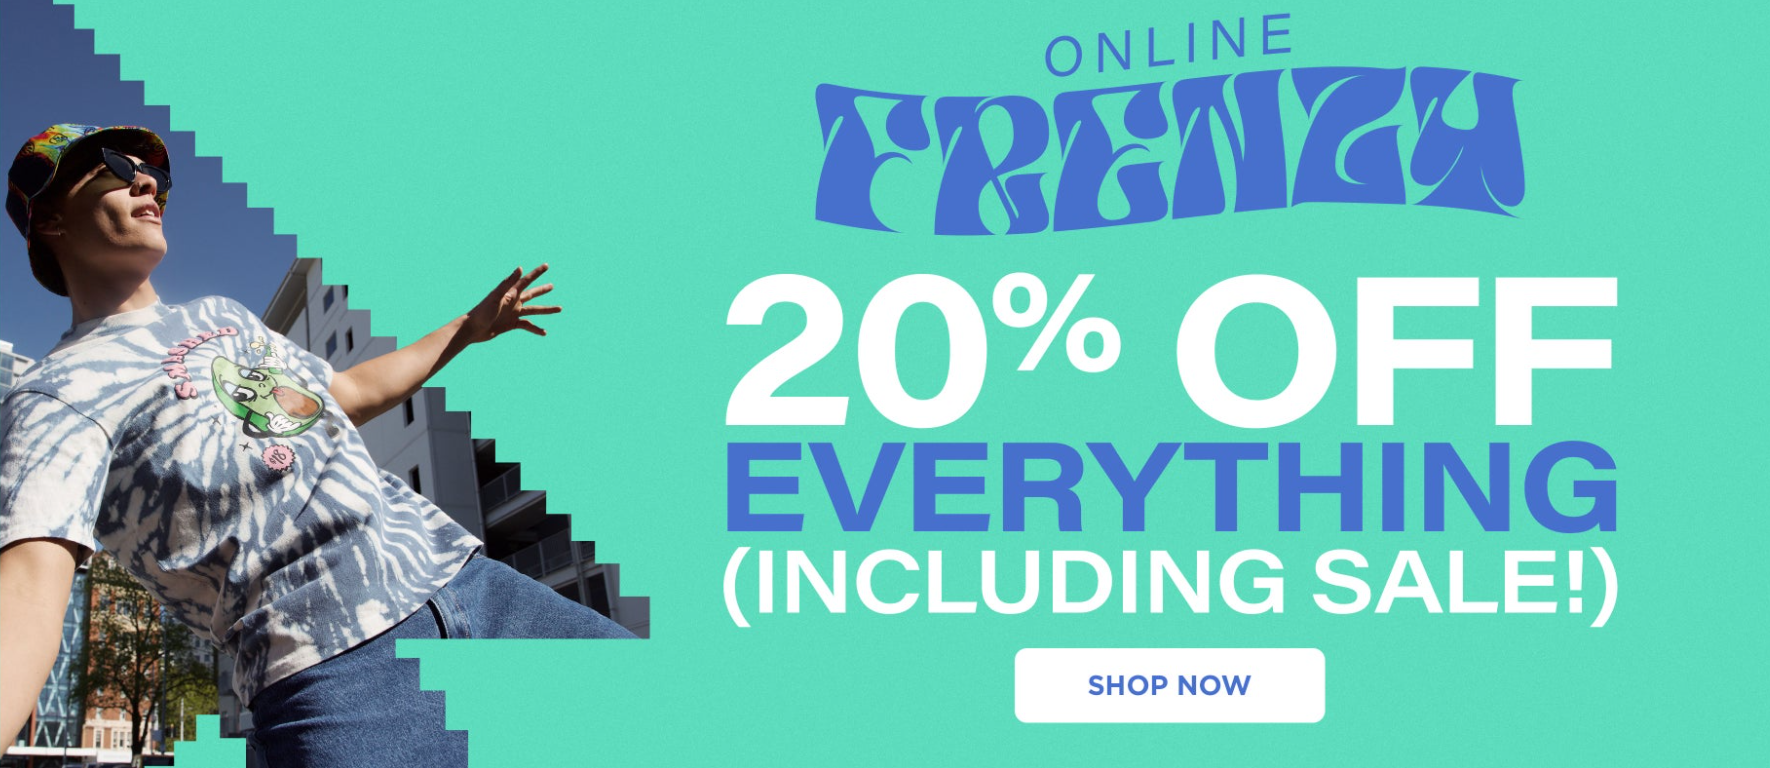 Hallensteins Frenzy sale 20% of everything online including sale items